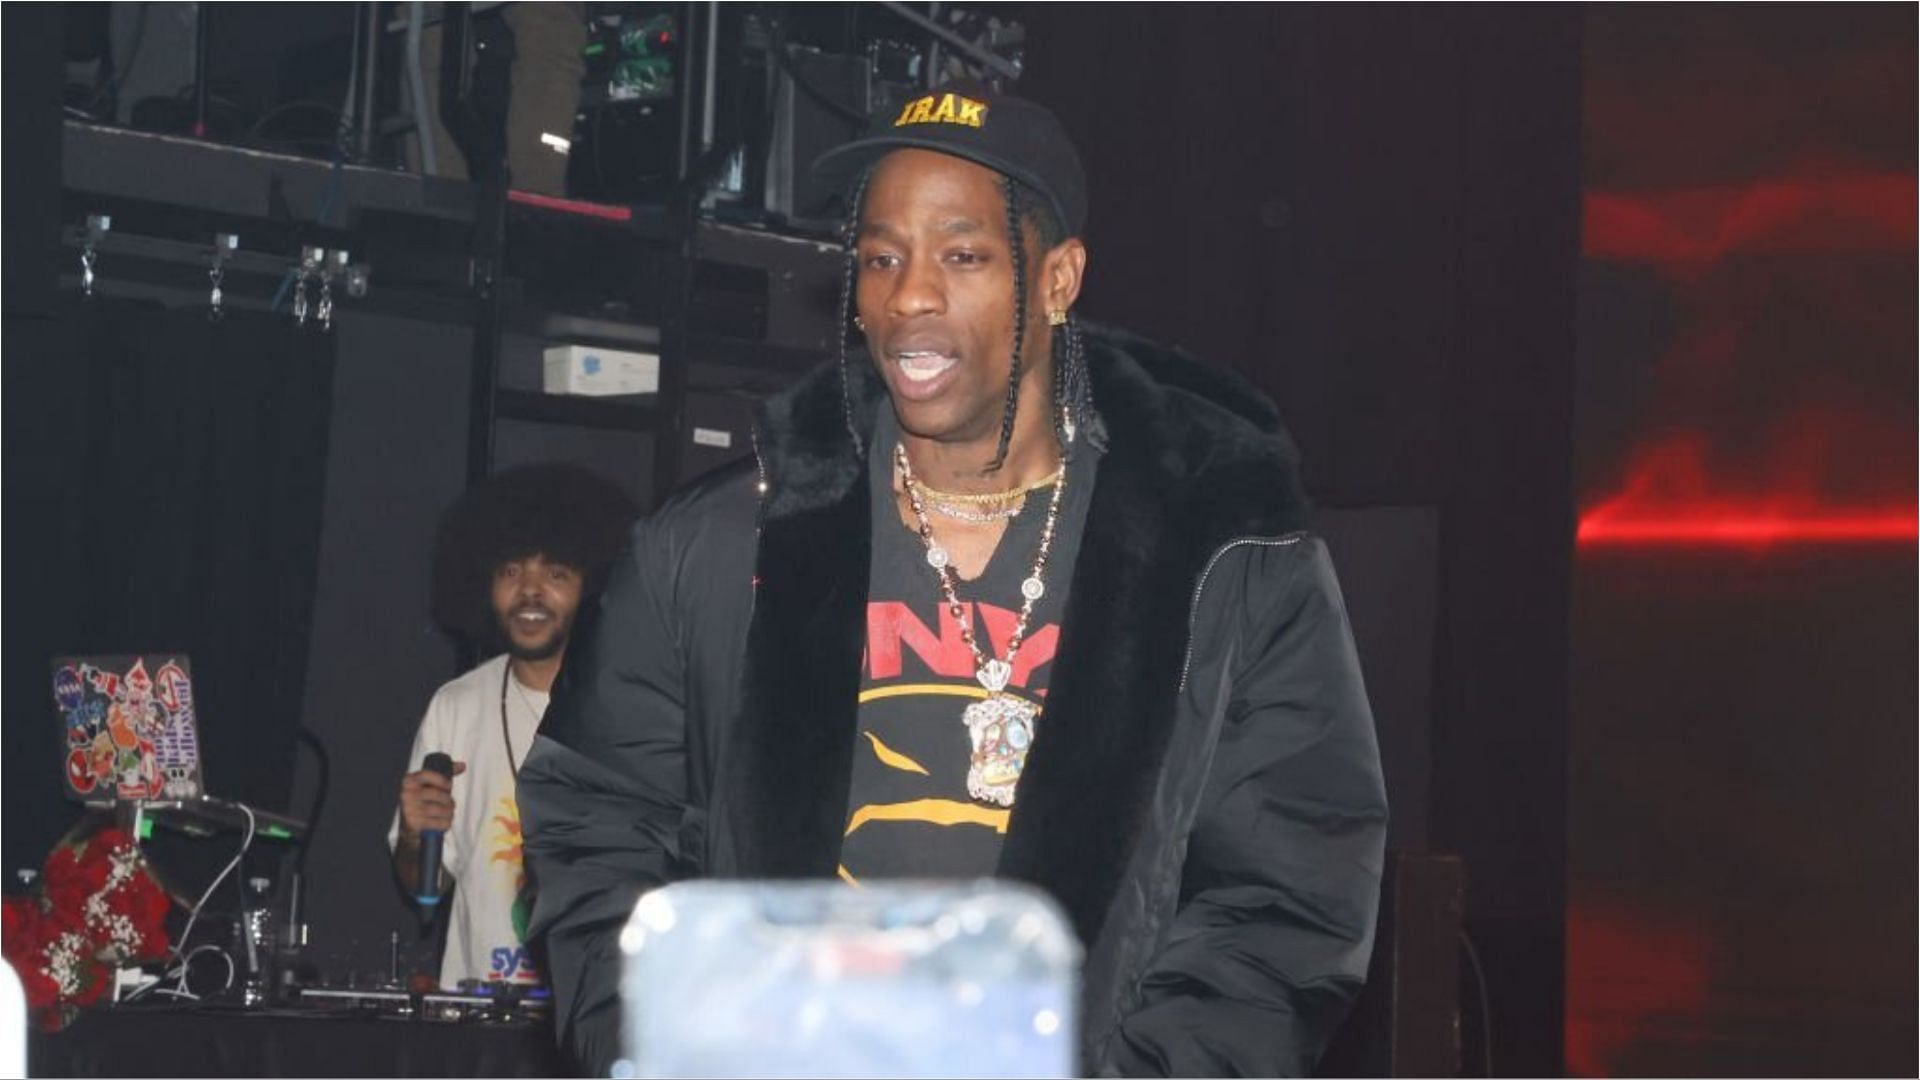 Travis Scott is reportedly wanted by the cops after punching a man inside the club (Image via Johnny Nunez/Getty Images)